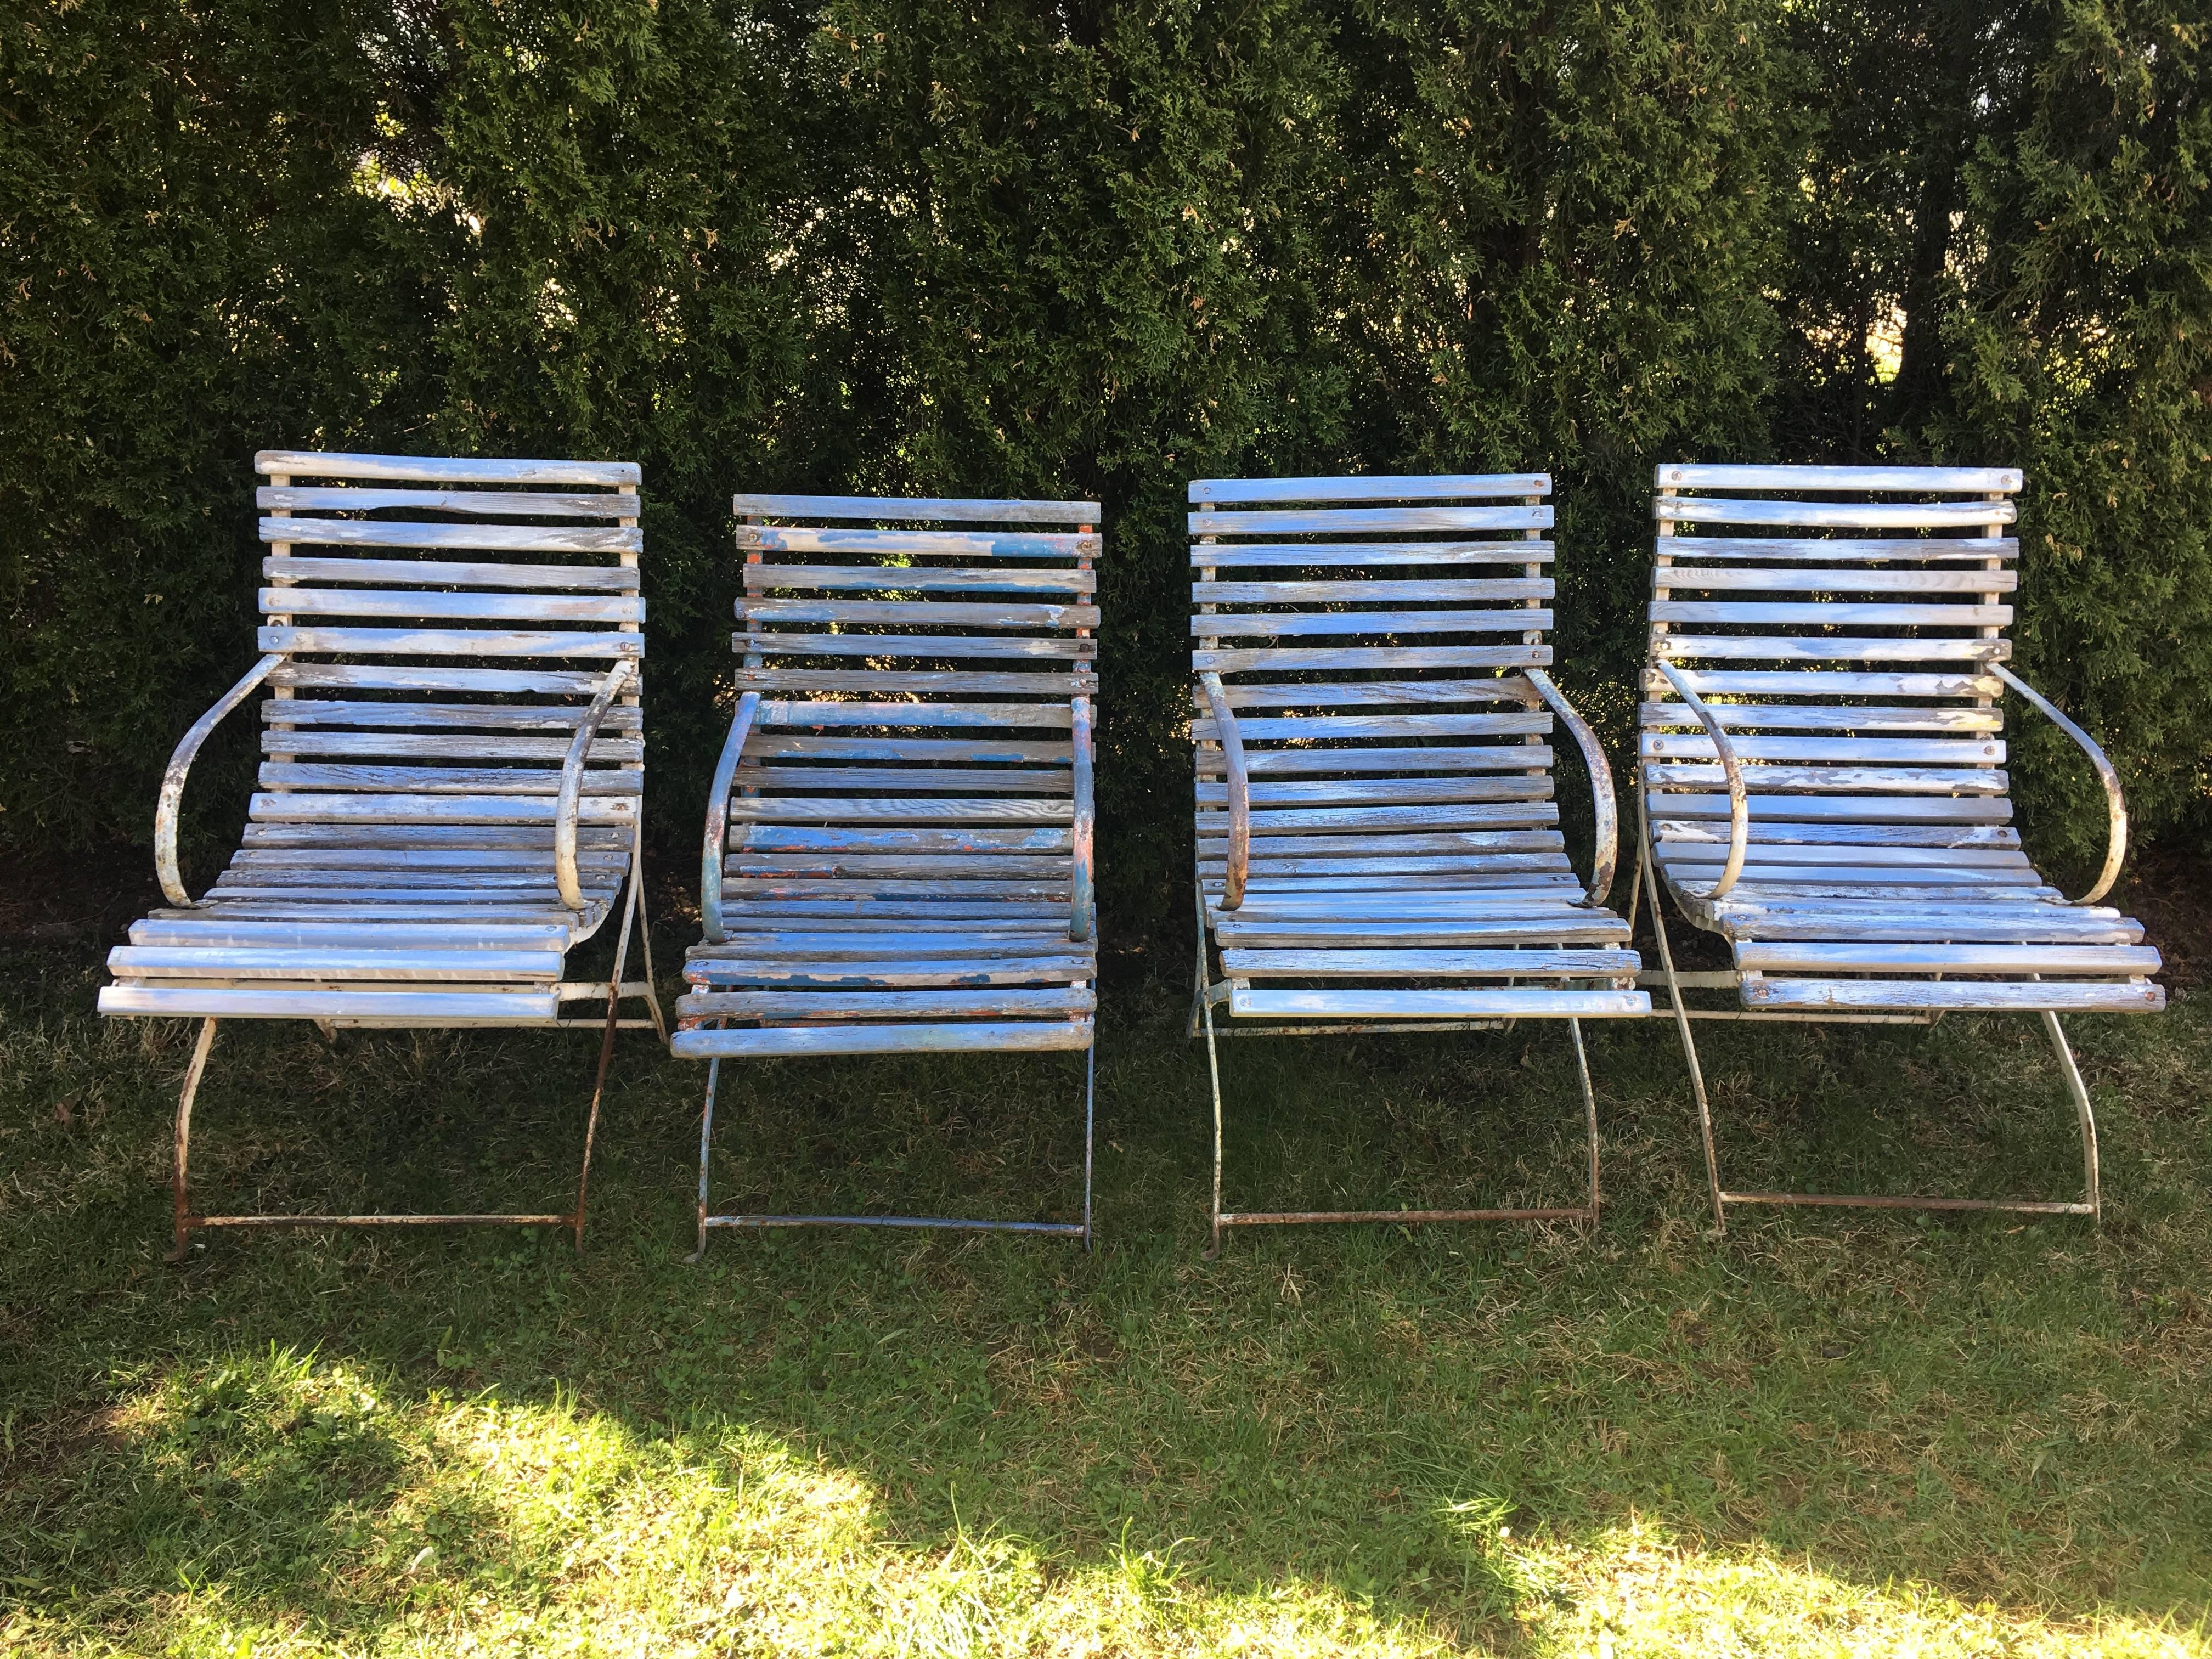 These supremely comfortable armchairs came from the famed Promenade des Anglais on the Nice waterfront in France. Their wrought iron frames are in original painted condition, but some of the oak slats have been replaced and colored to match the